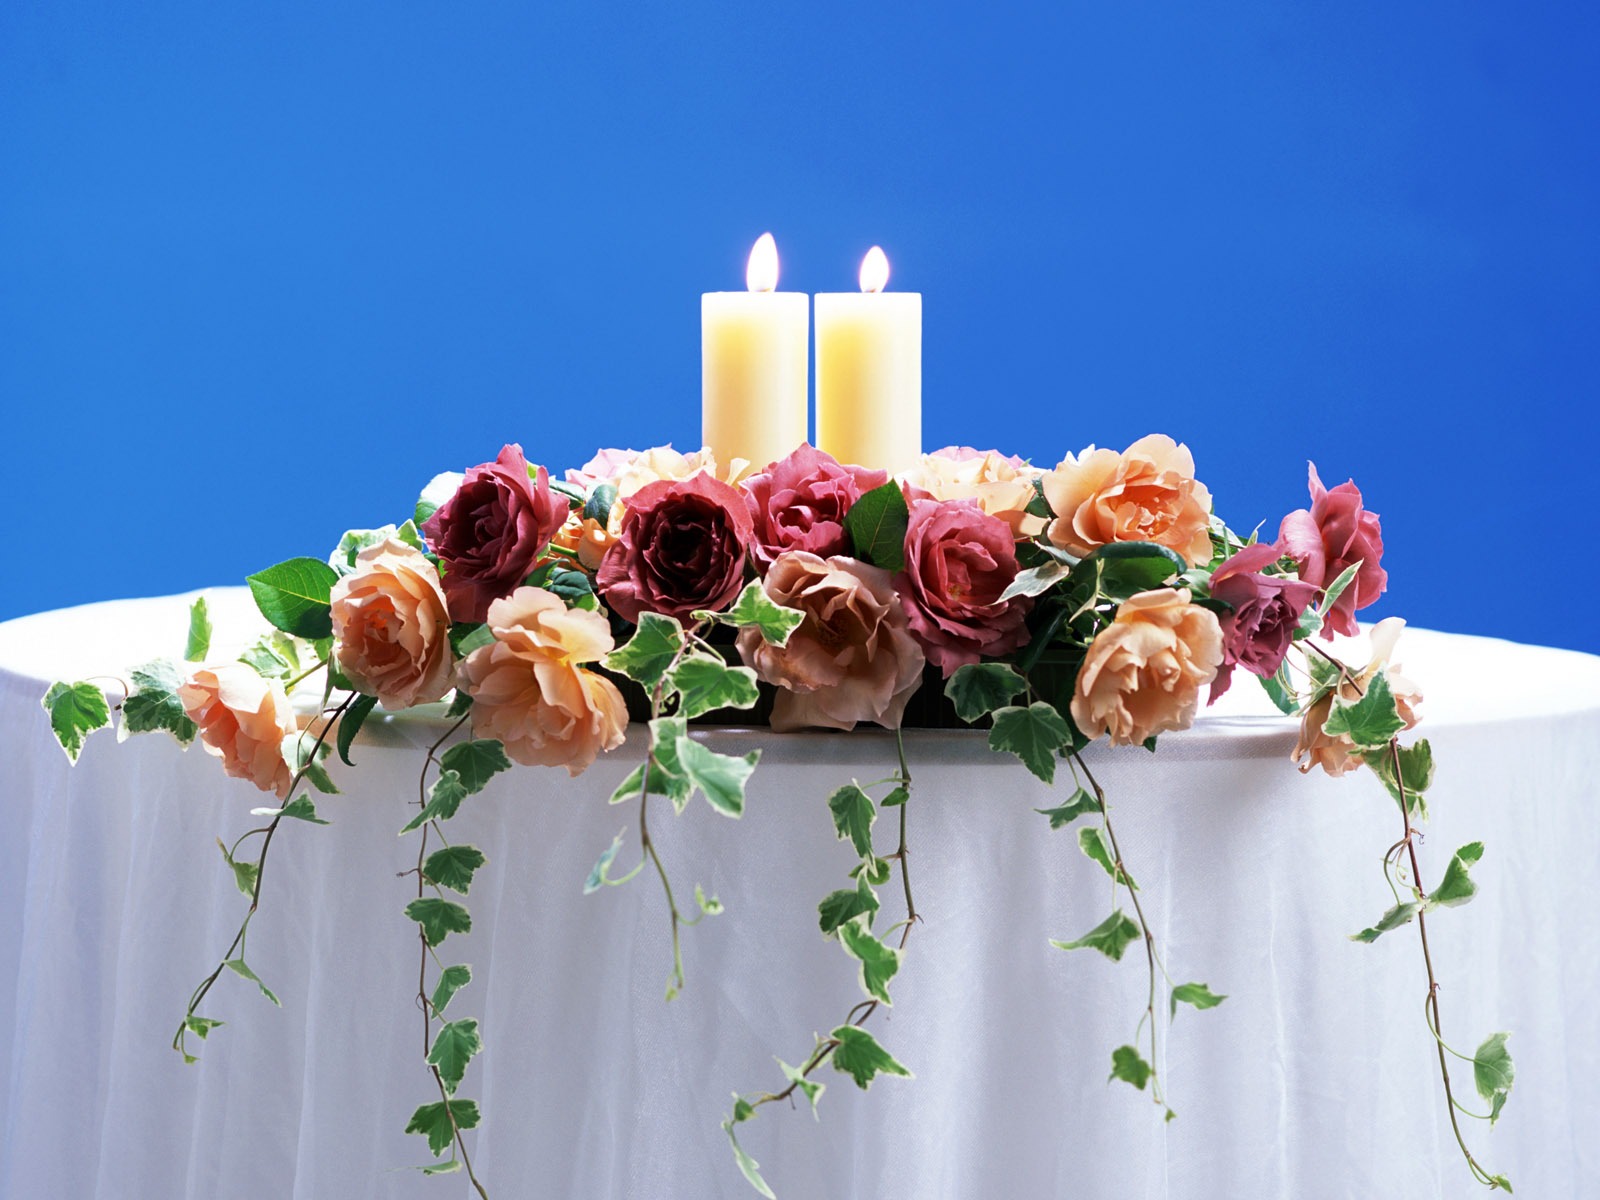 Weddings and Flowers wallpaper (2) #13 - 1600x1200